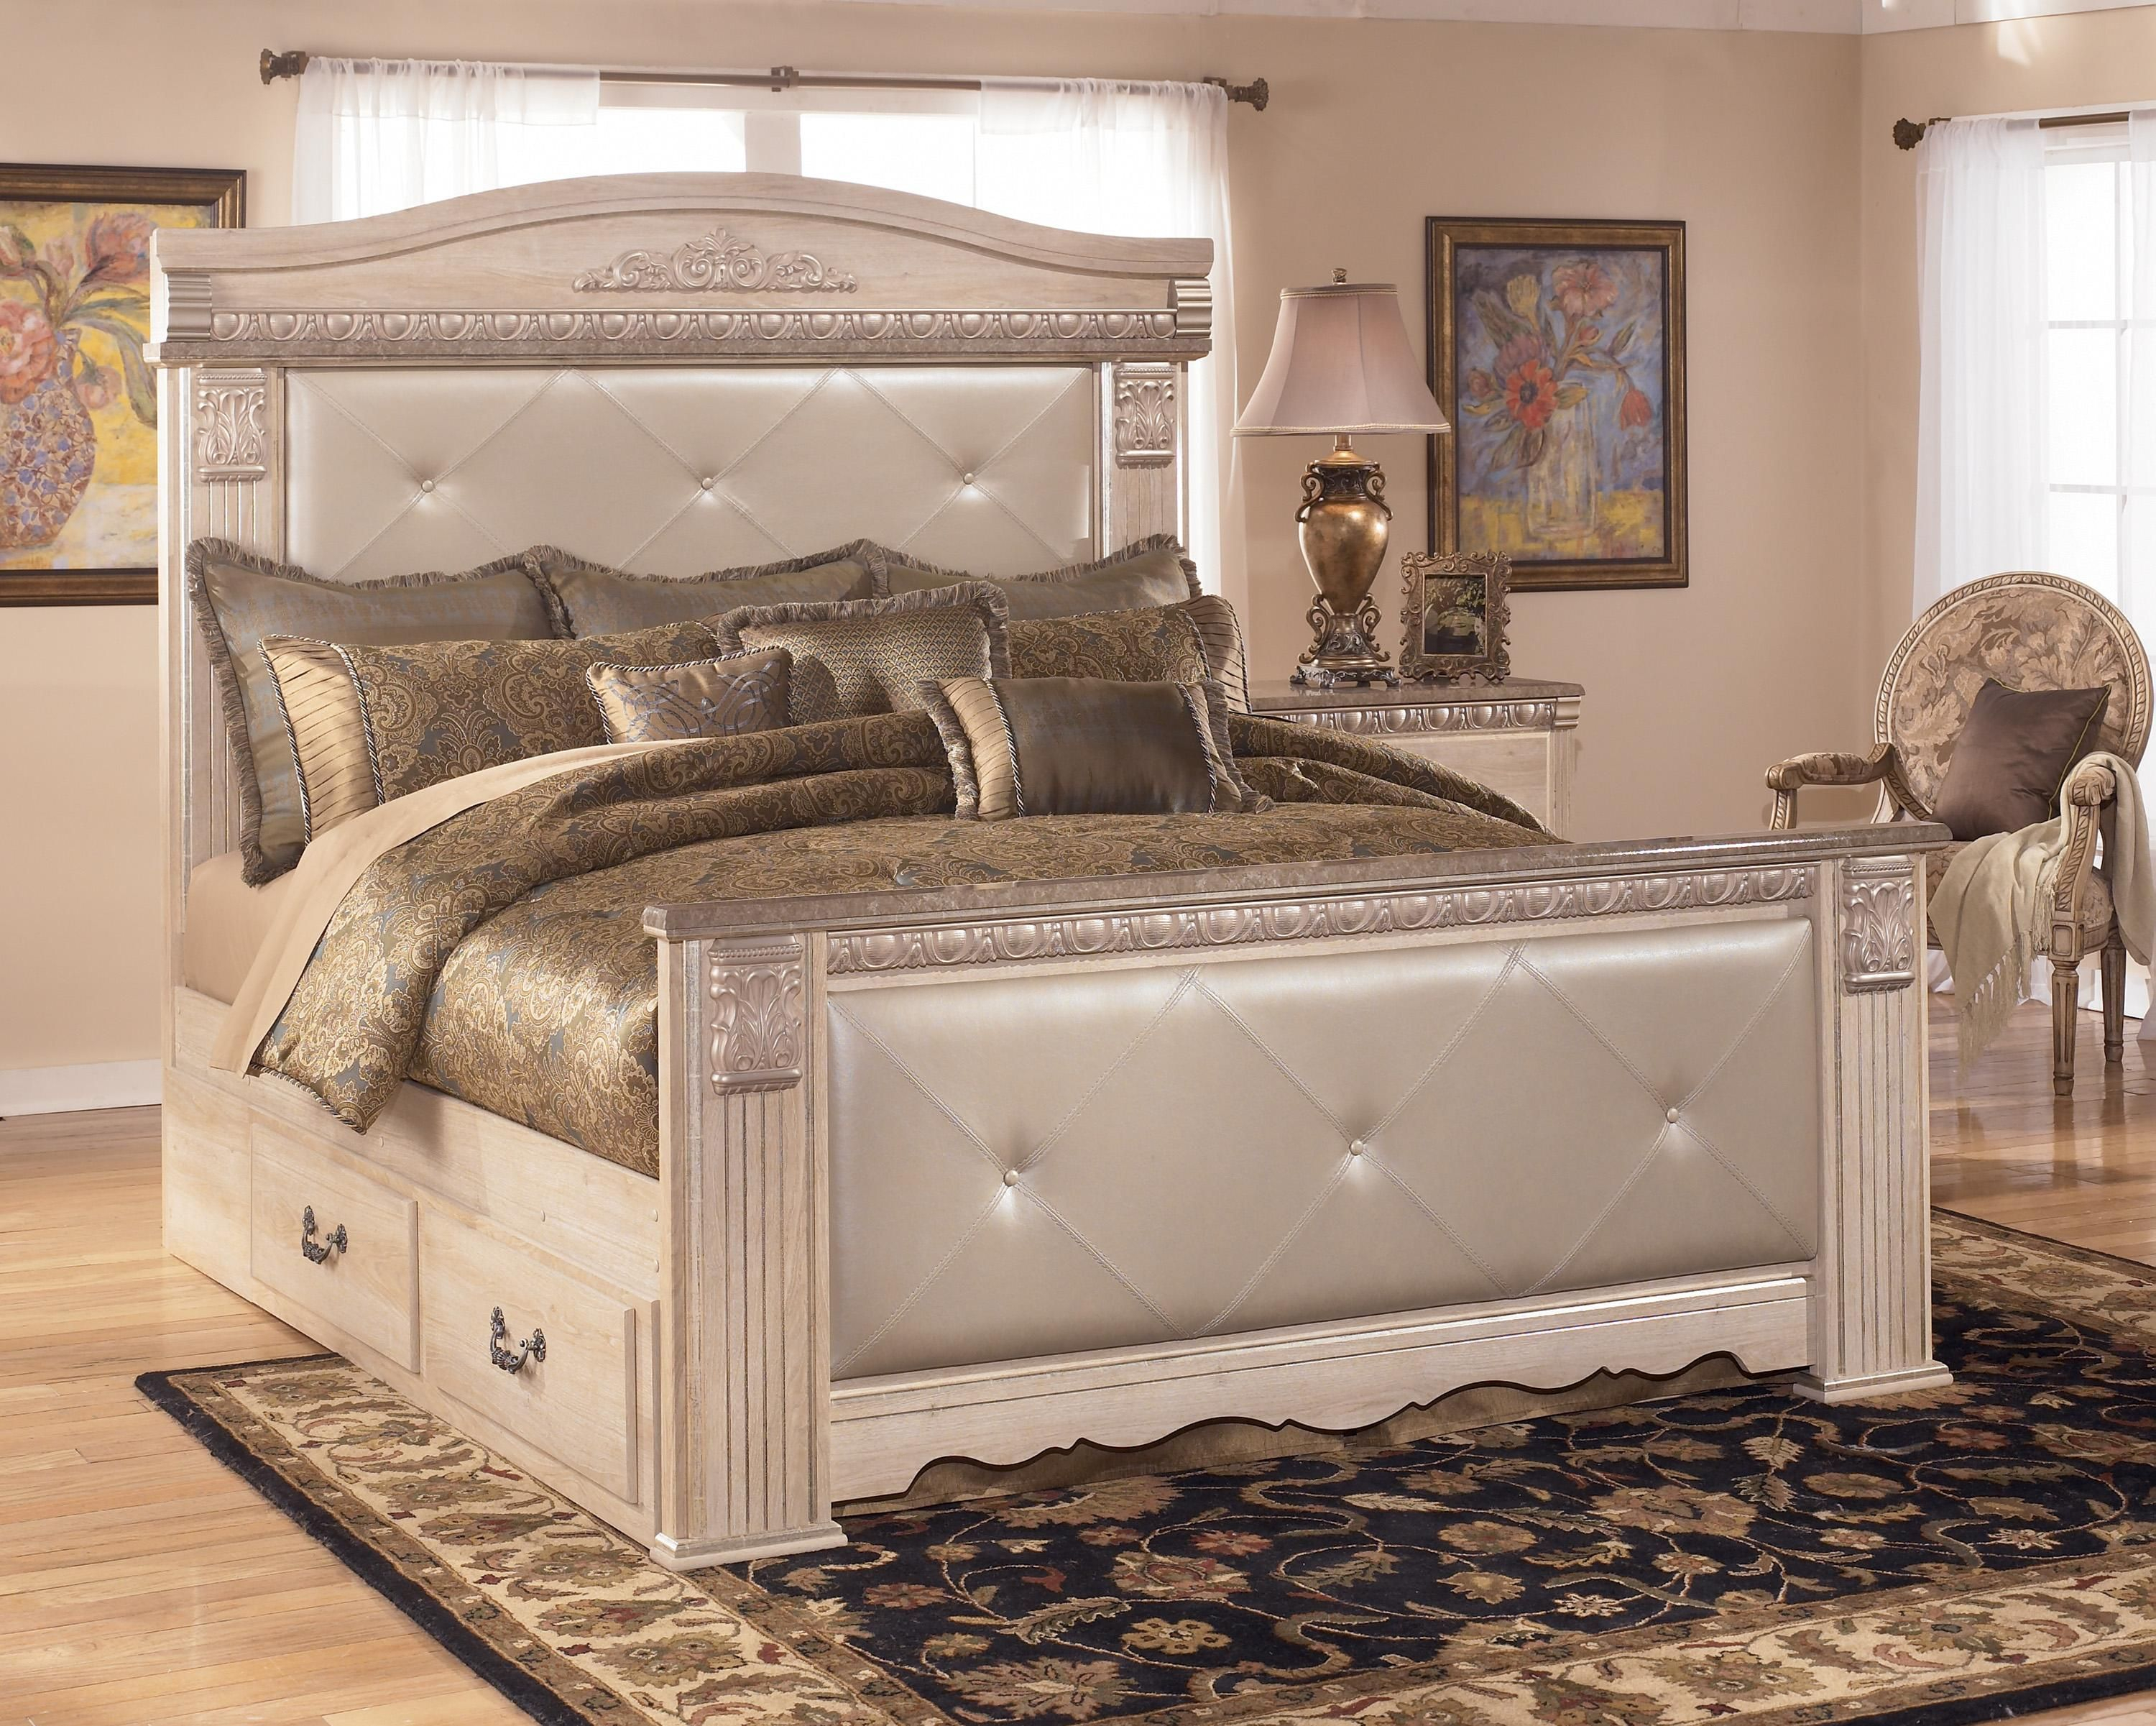 Silverglade King Upholstered Mansion Bed With Storage Beds And in sizing 3000 X 2401